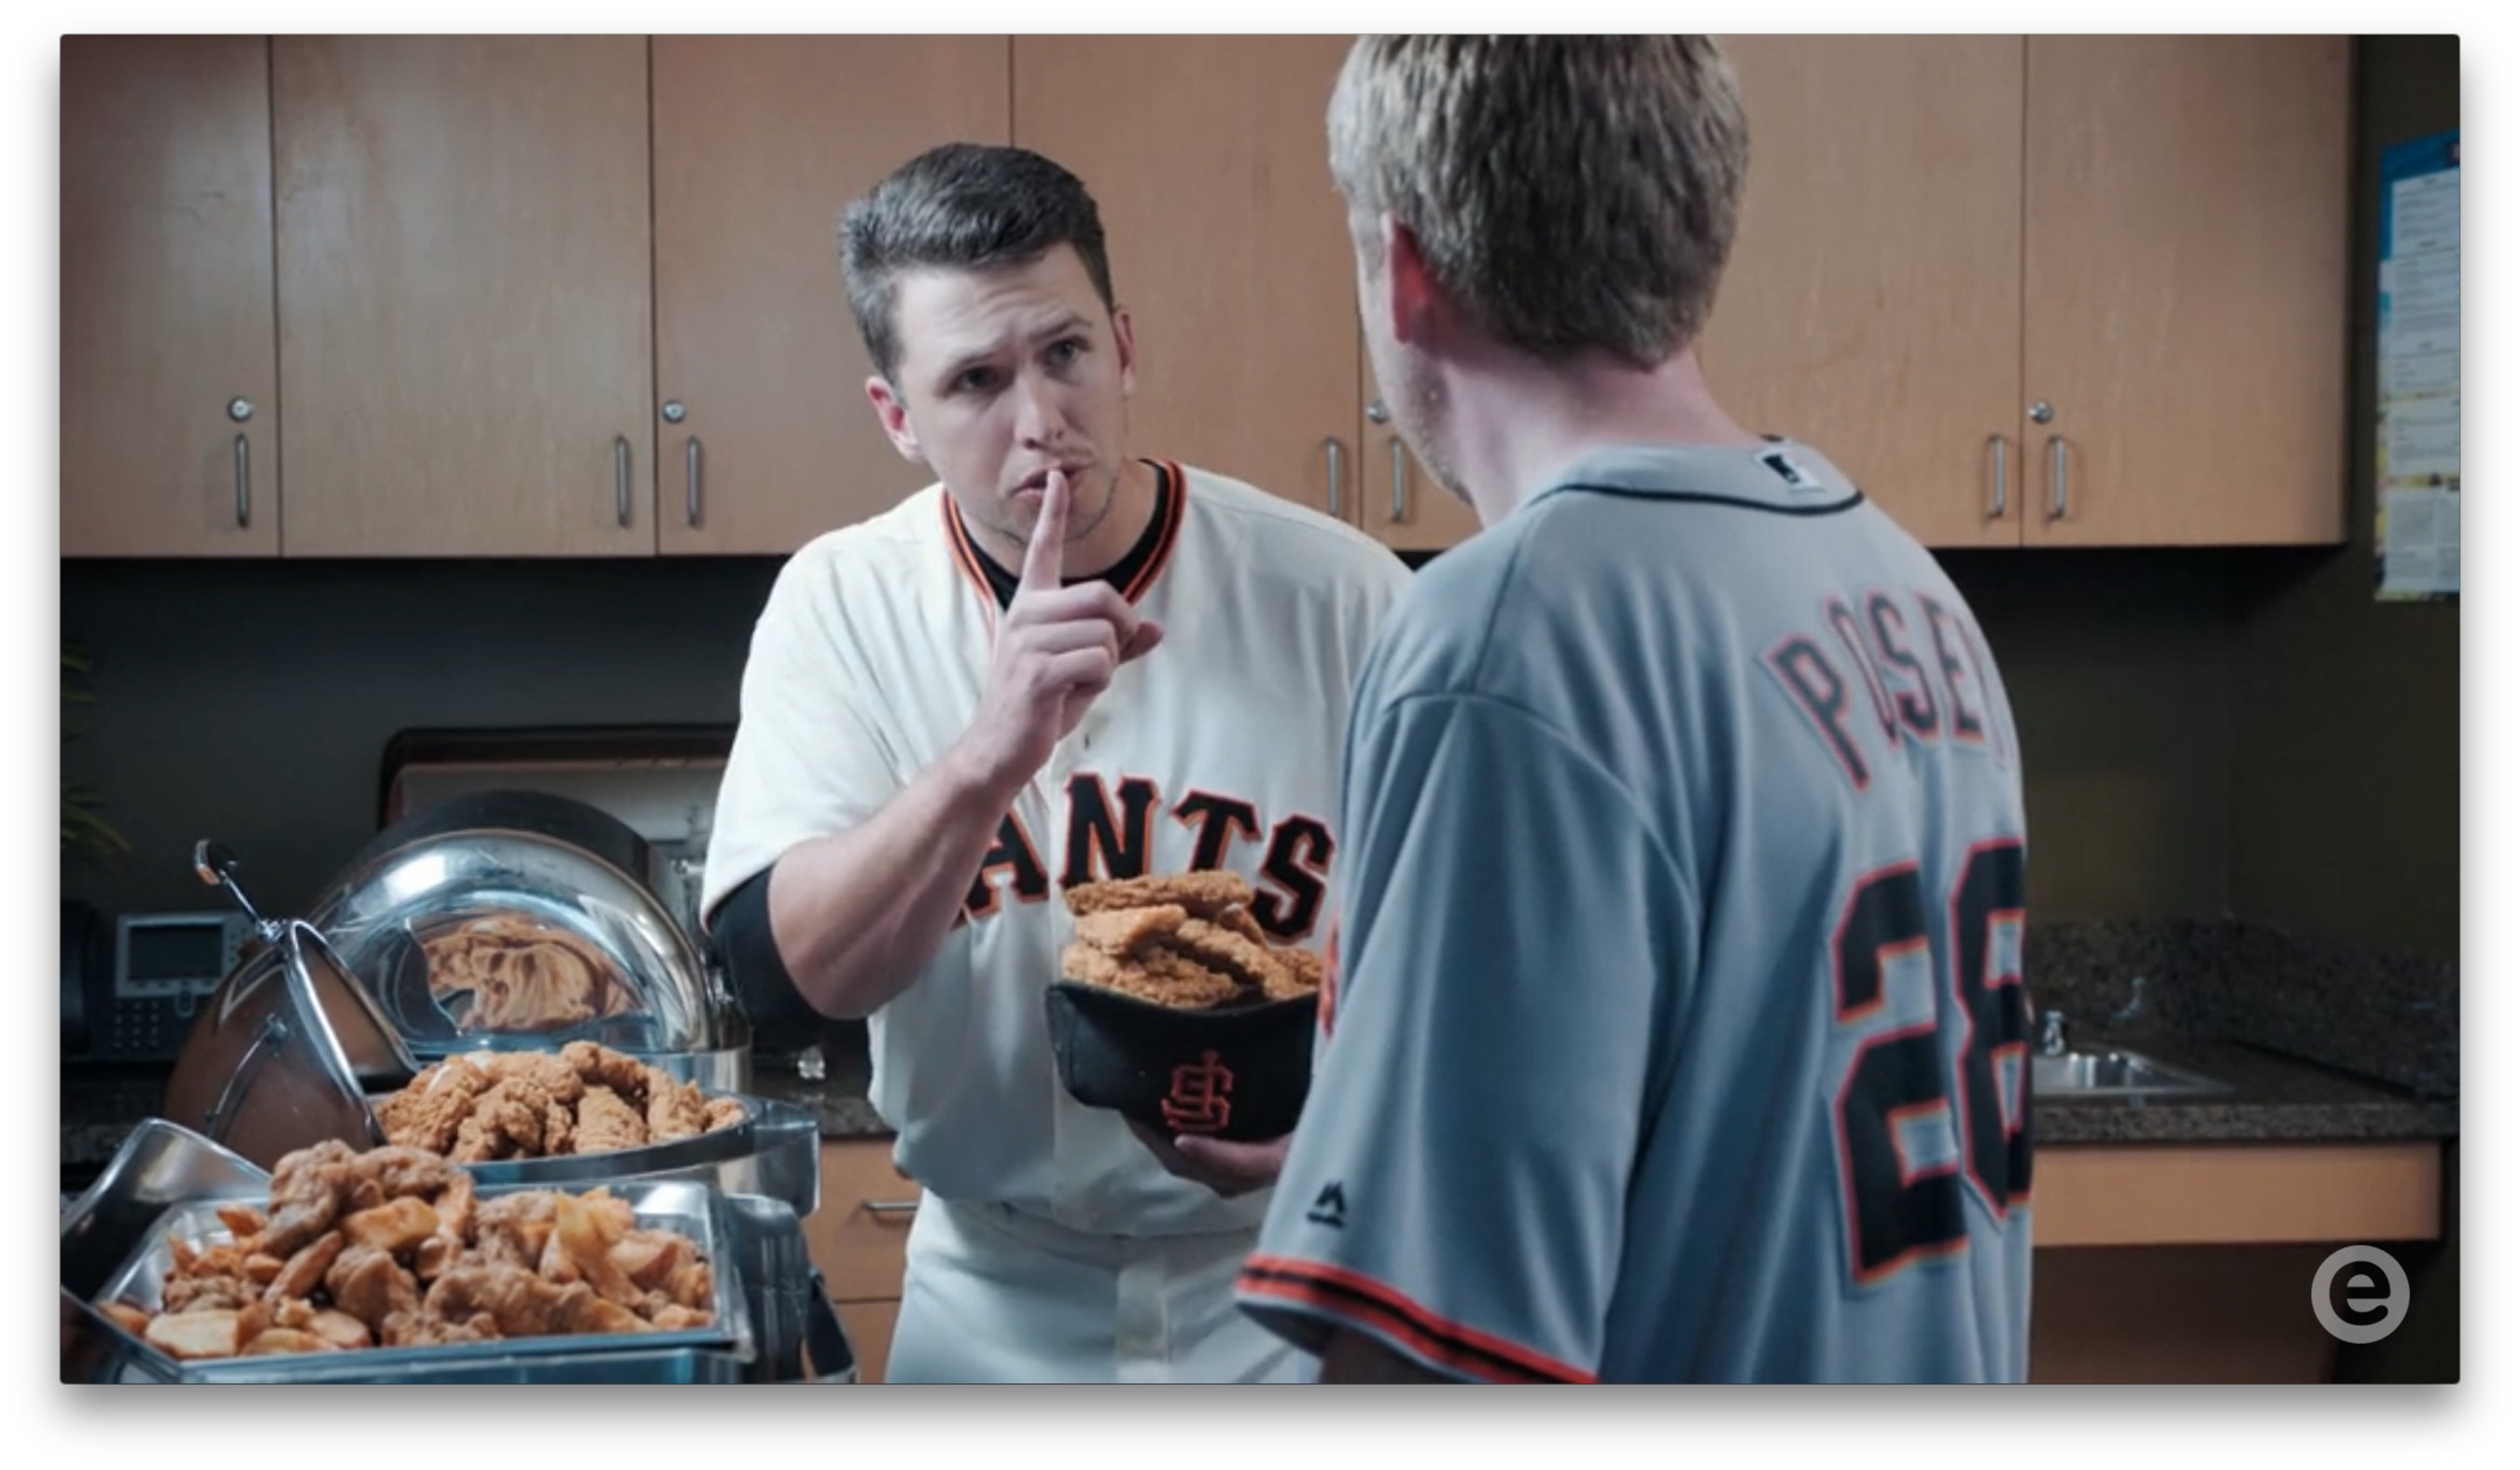 Buster Posey, Giants baseball player, in new Esurance commercial.